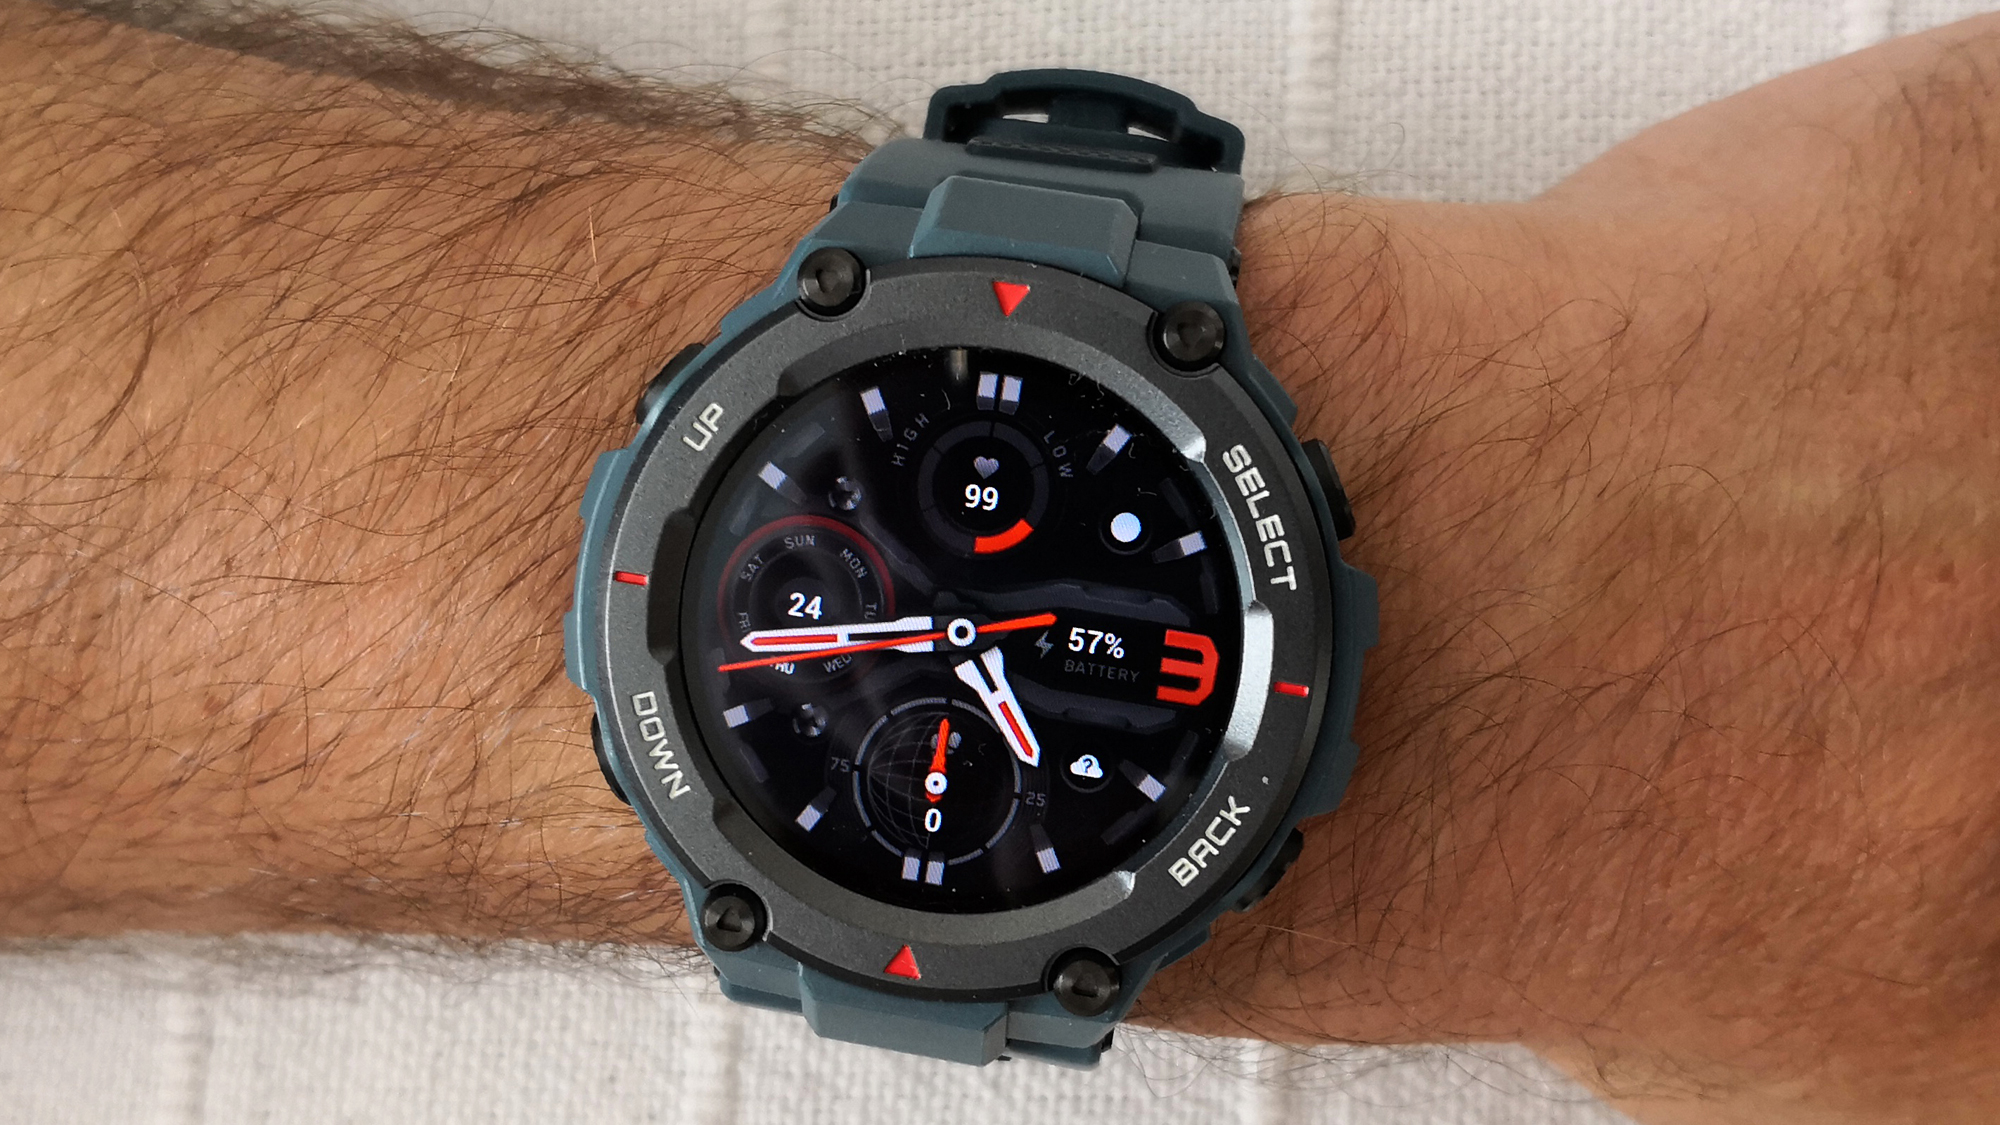 Amazfit T-Rex 2 review: The fitness watch that's tough